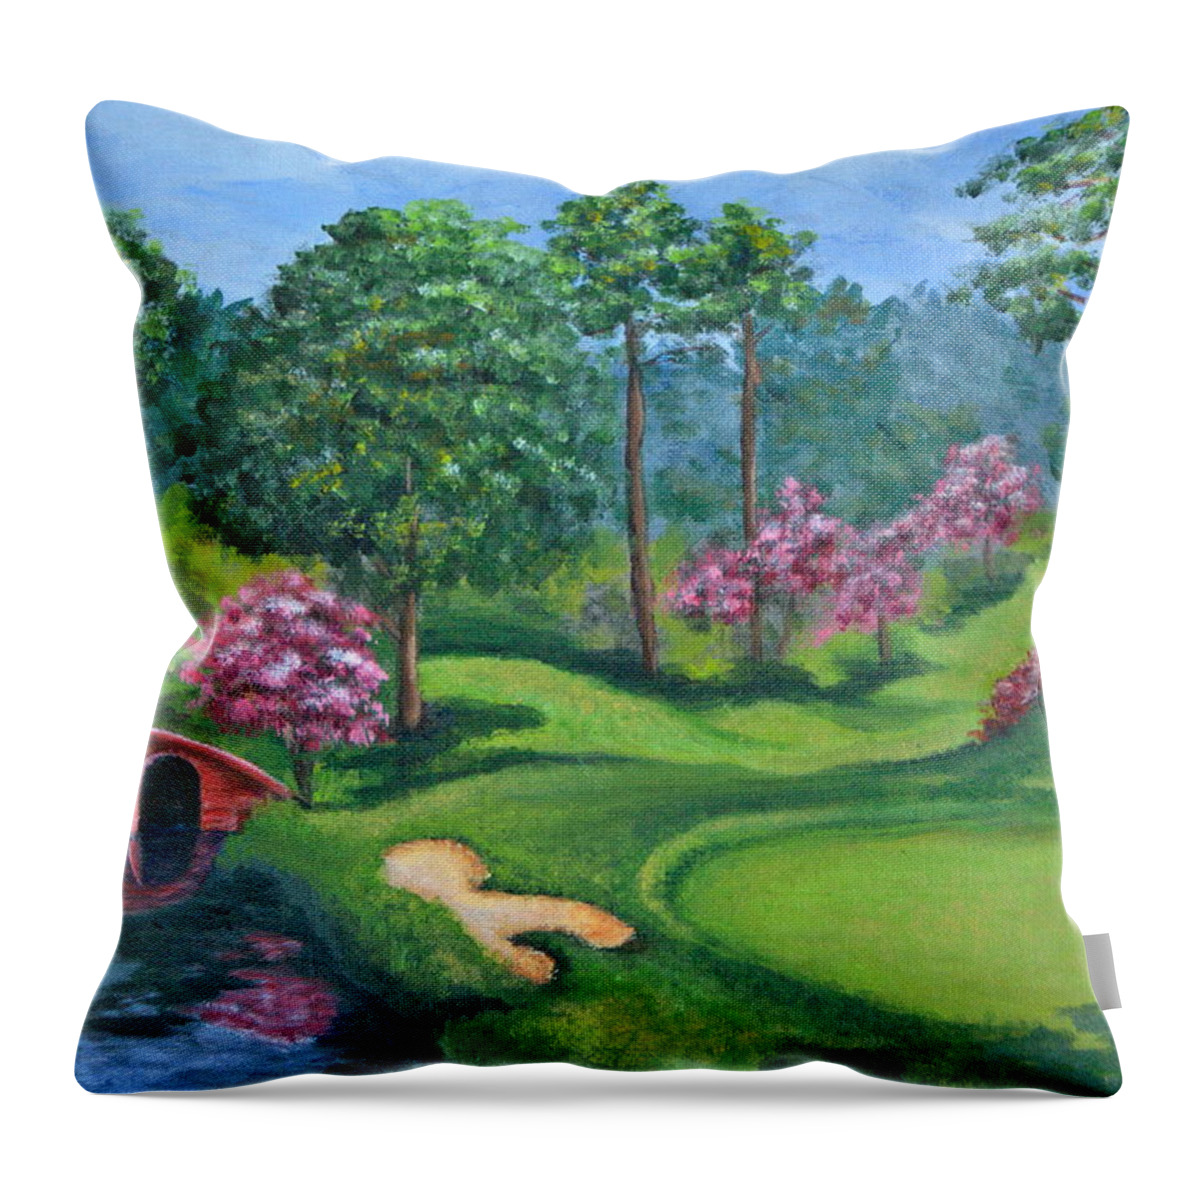 Golf Course Throw Pillow featuring the painting 18th Hole by Theresa Cangelosi